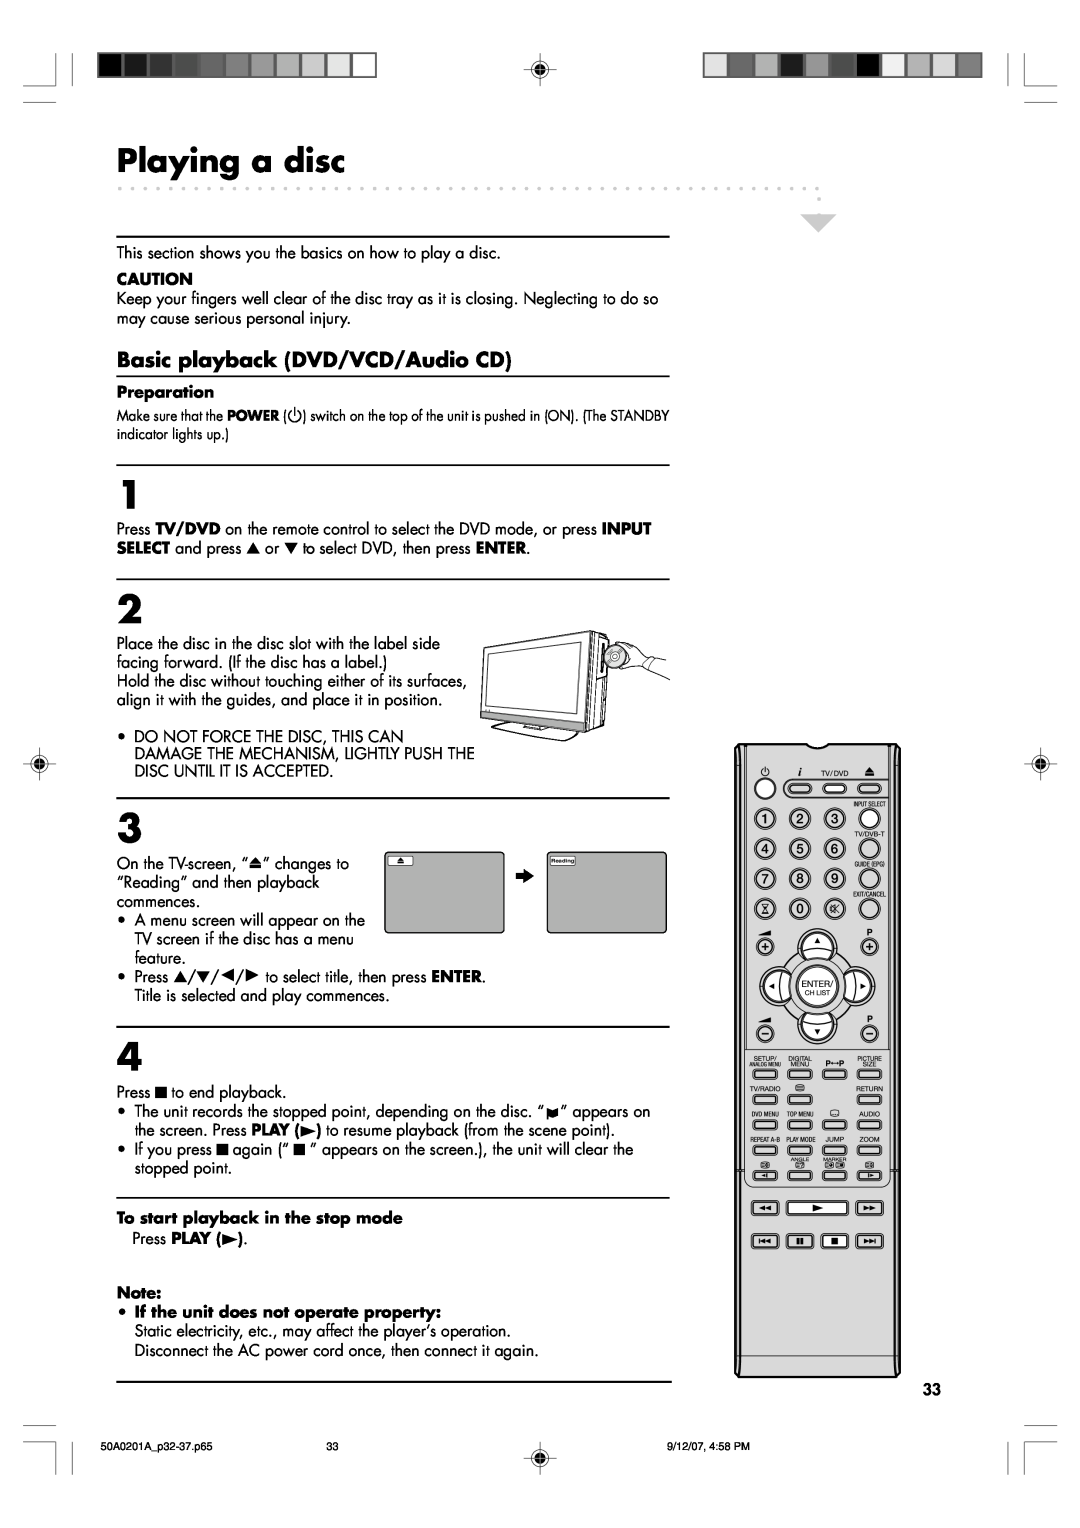 Sansui TV19PL120DVD Playing a disc, To start playback in the stop mode, If the unit does not operate property, Preparation 